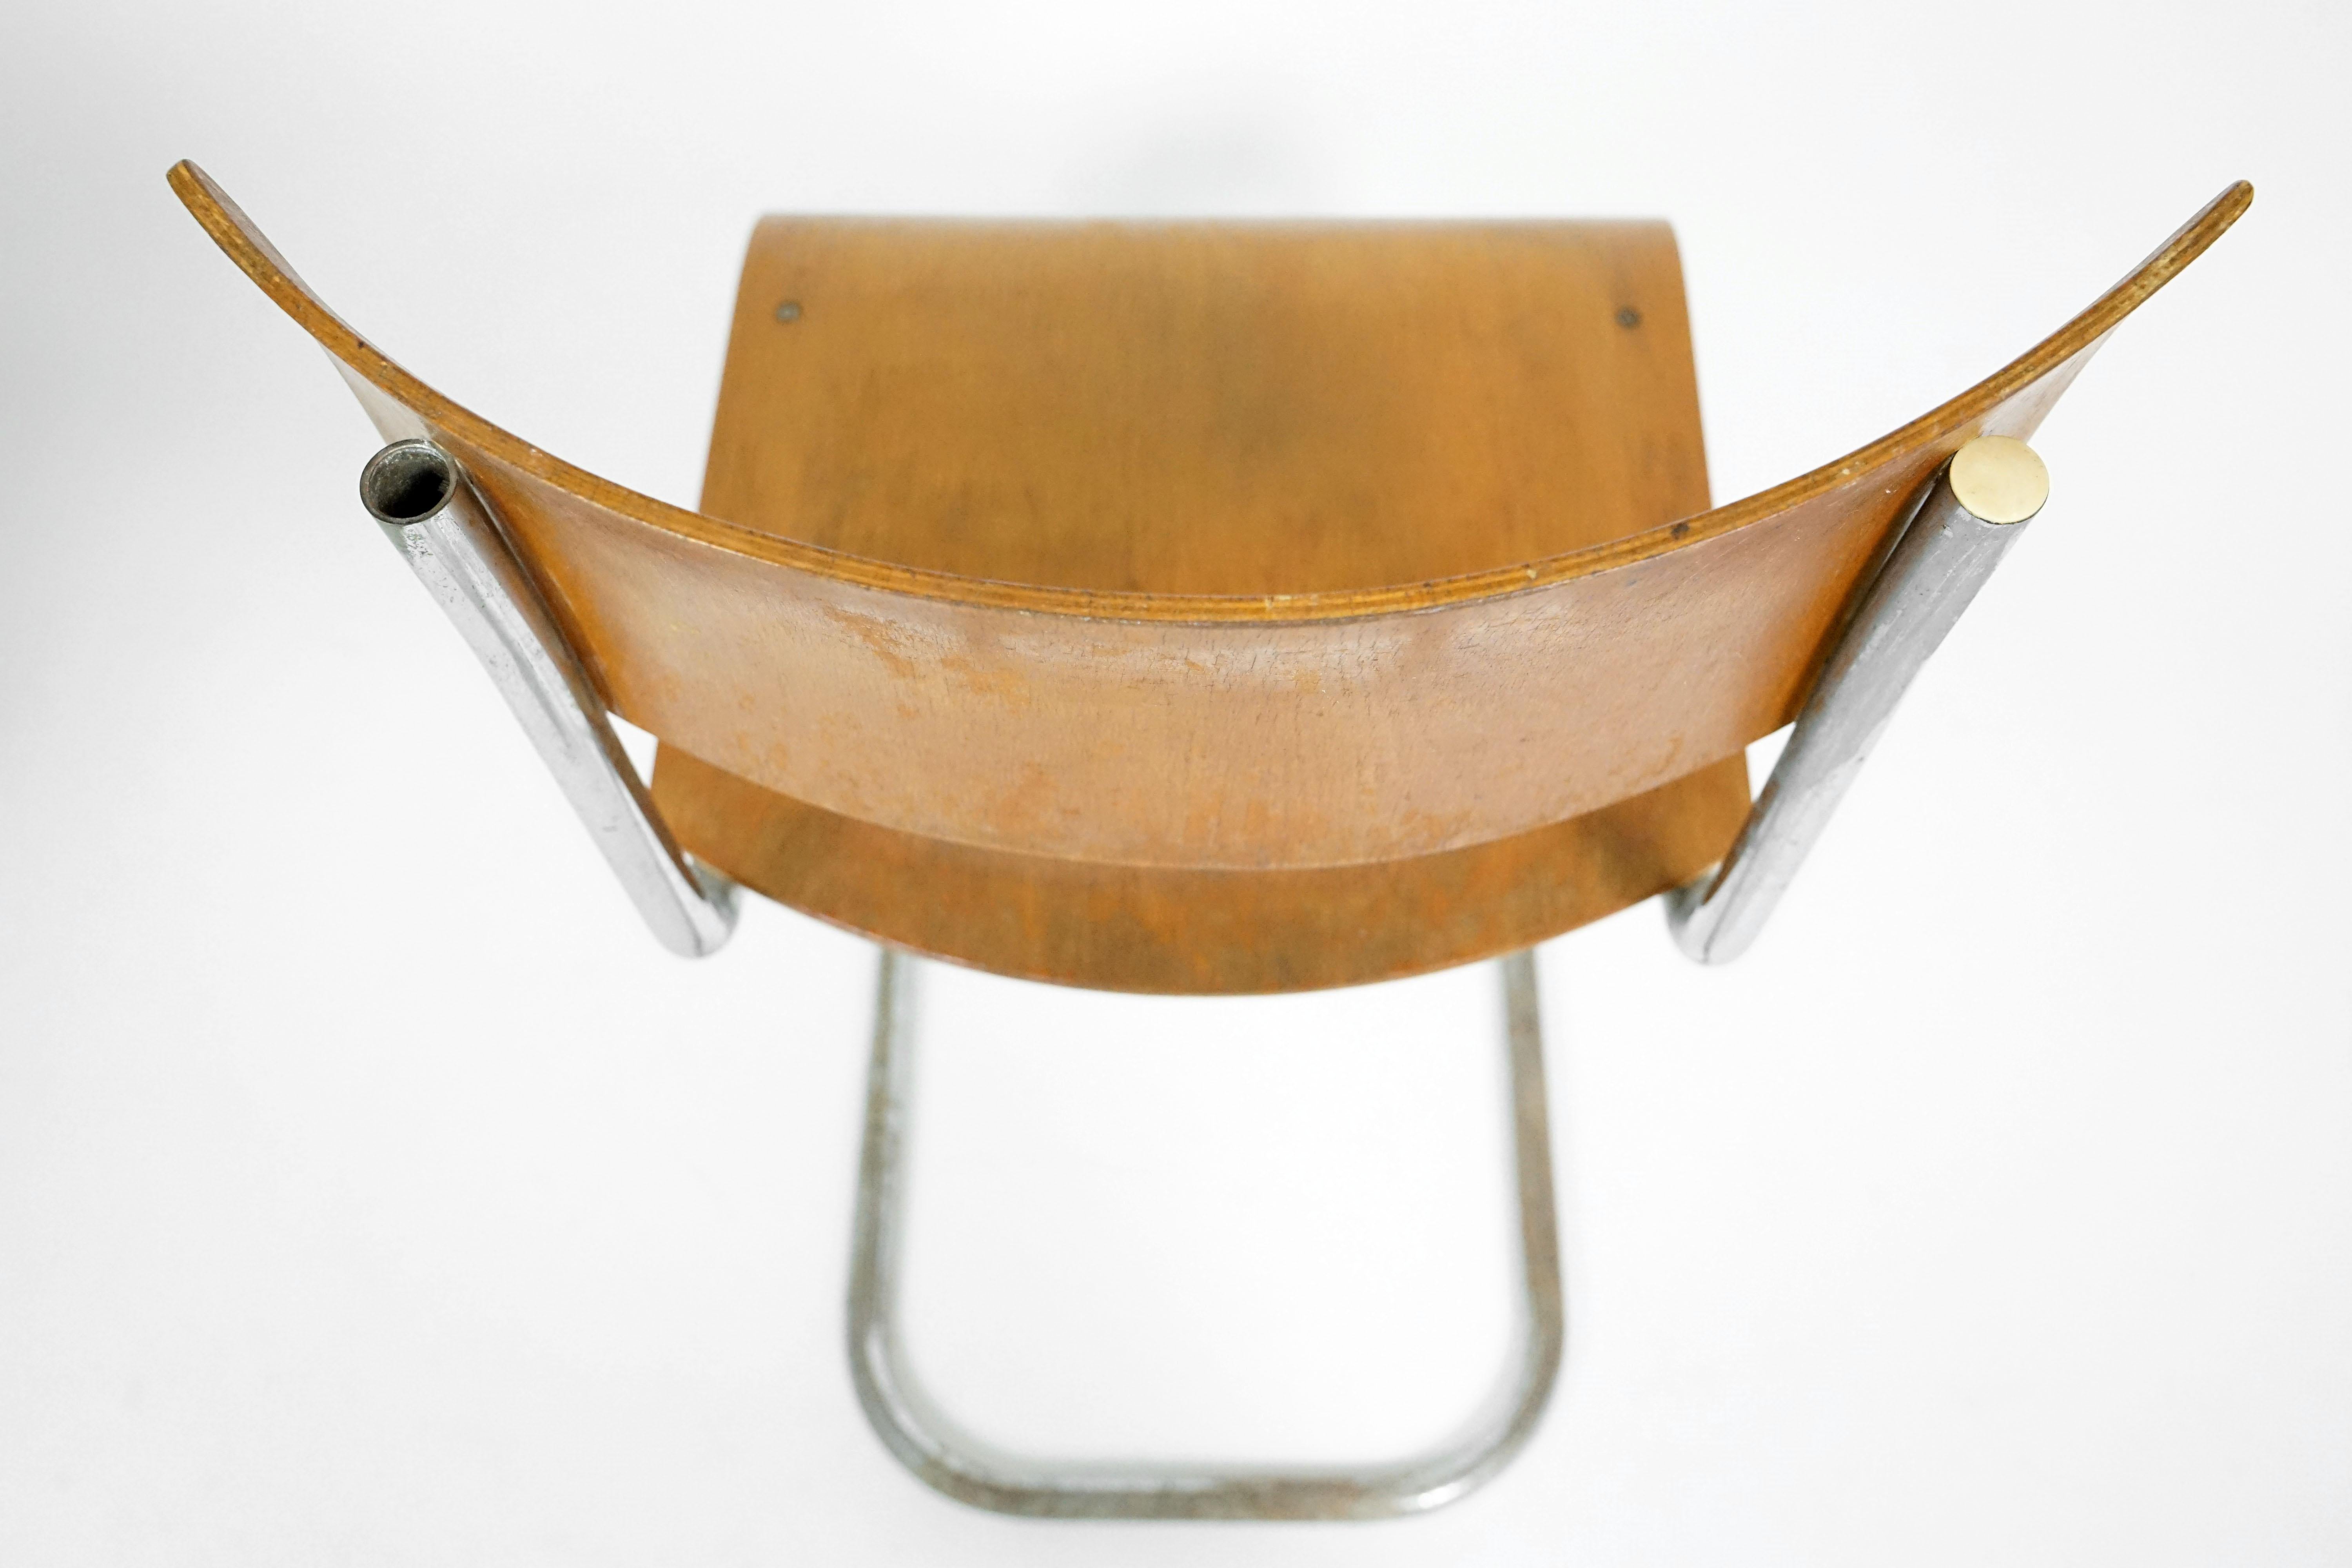 Plywood Cantilever Tubular Chairs Mart Stam, 1920s In Fair Condition For Sale In Vienna, Austria